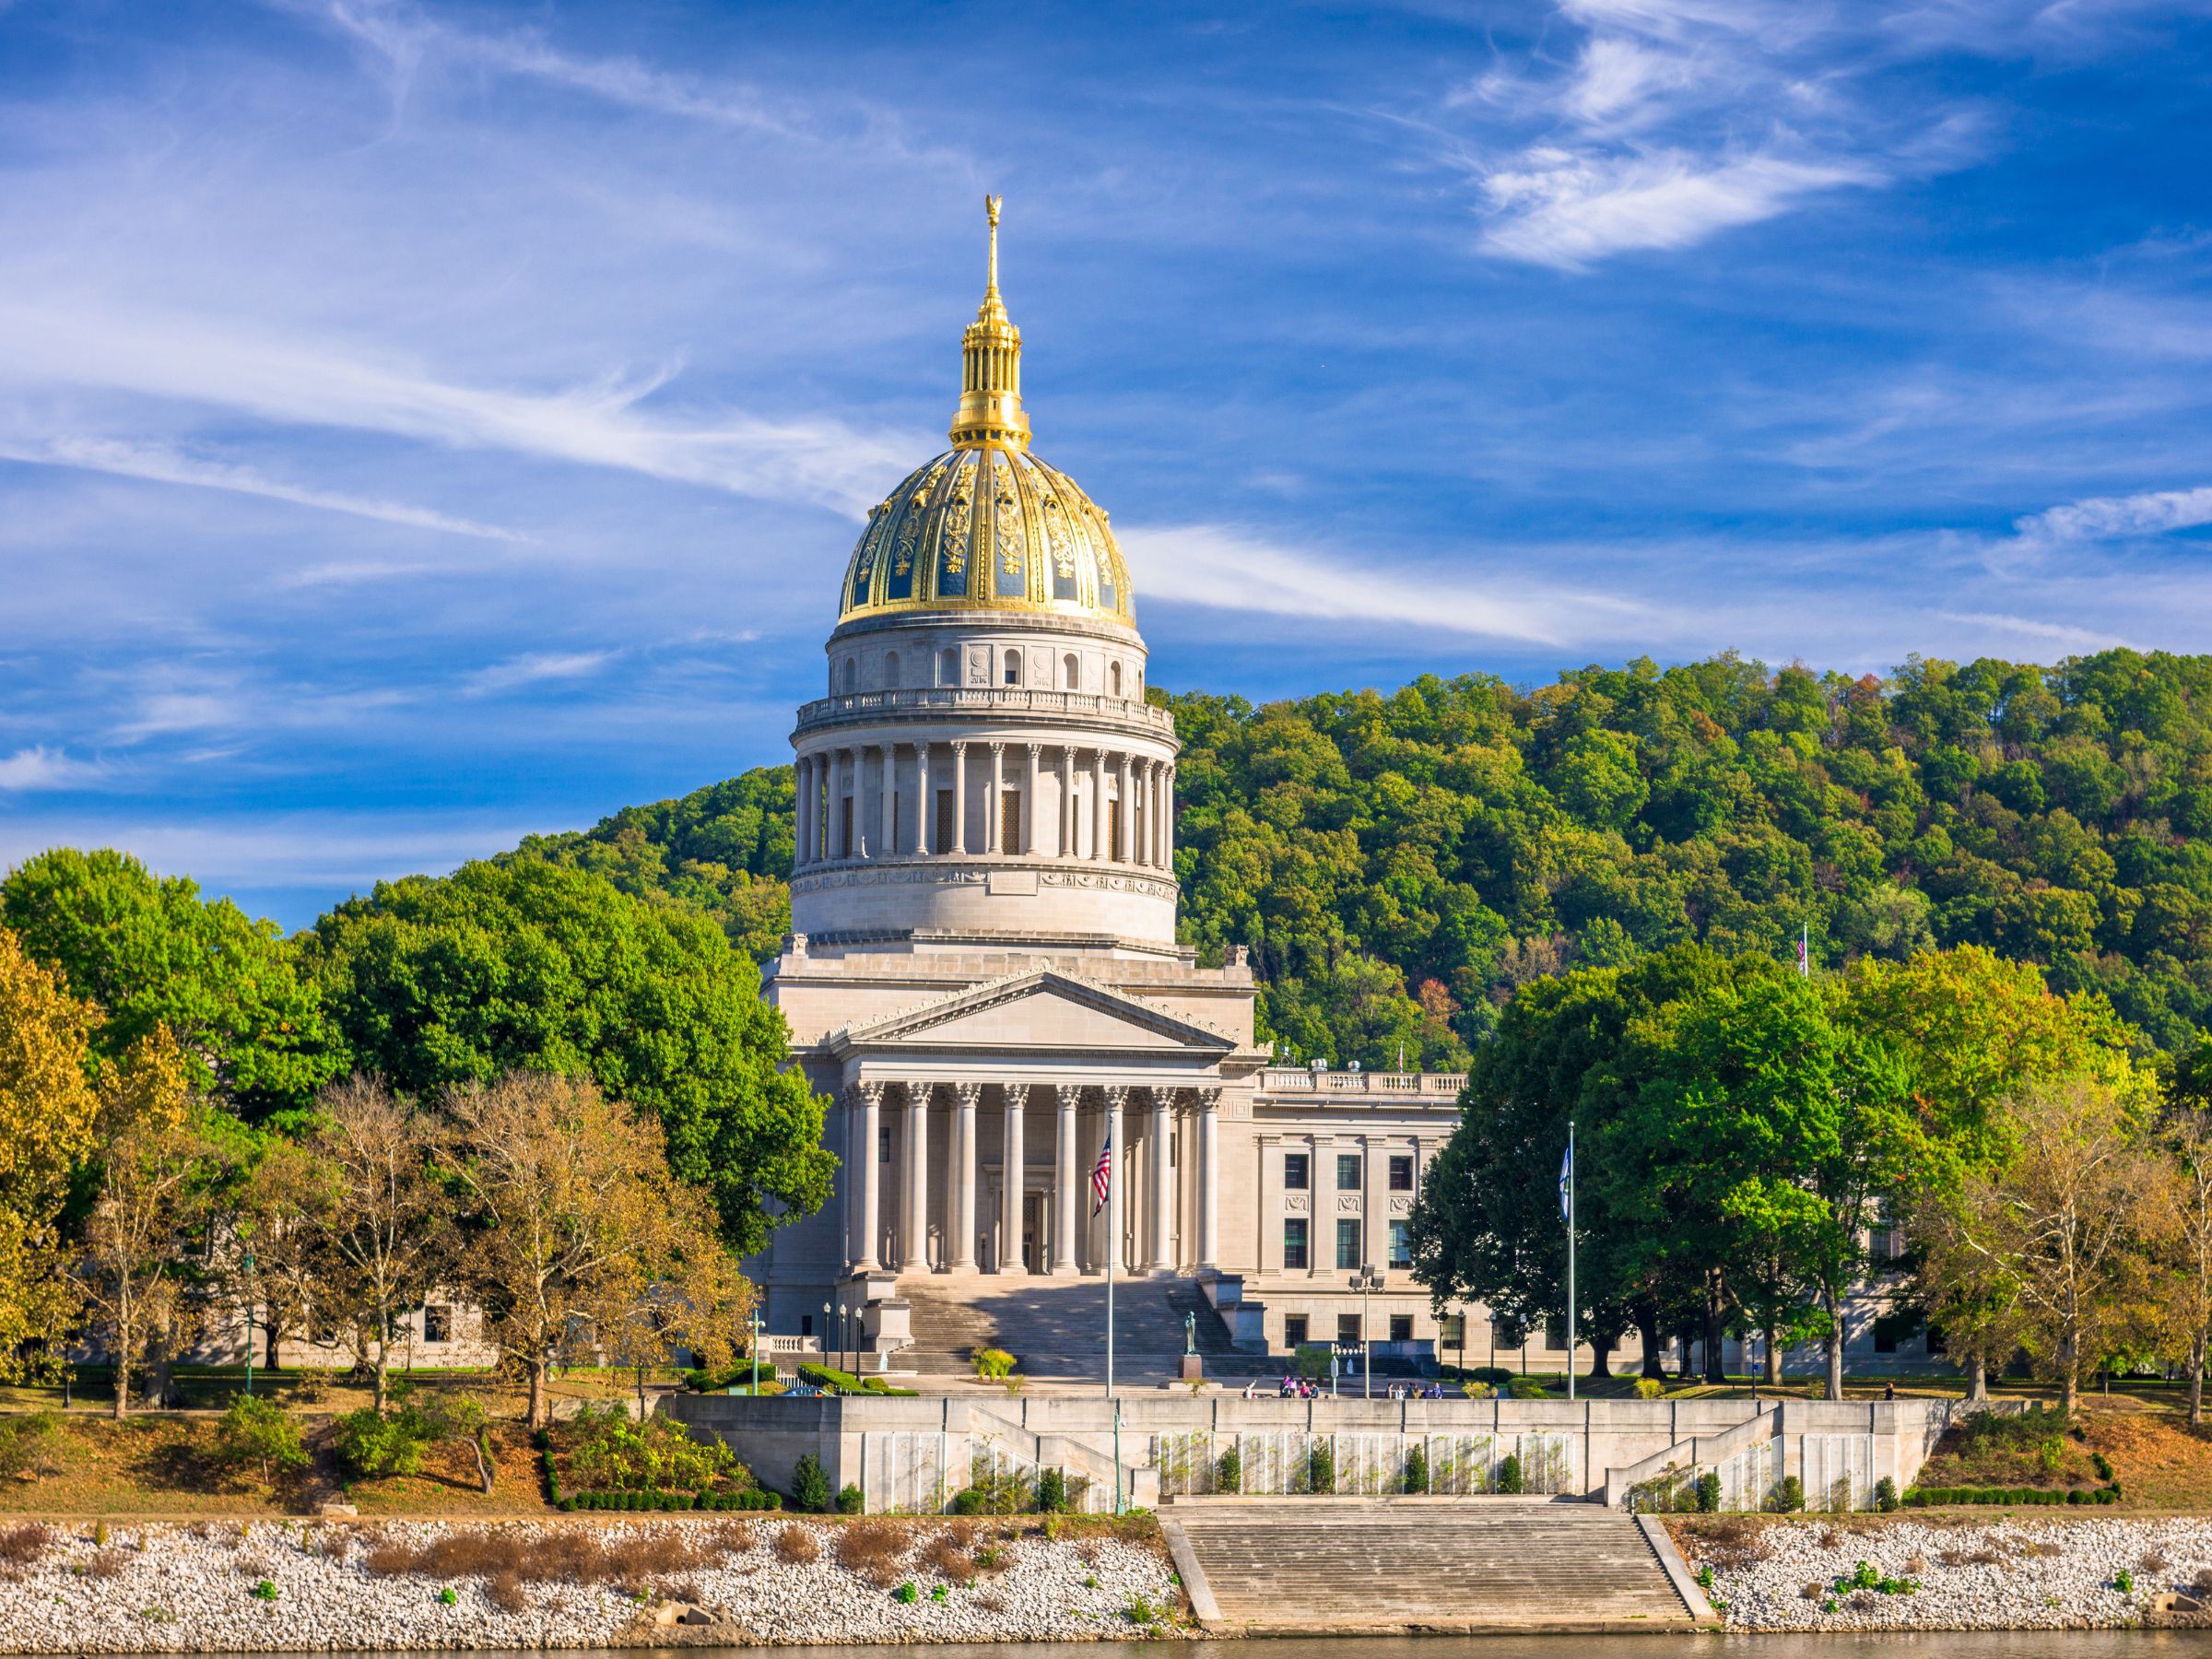 The West Virginia Capitol building sits above the Kanawha River in Charleston.